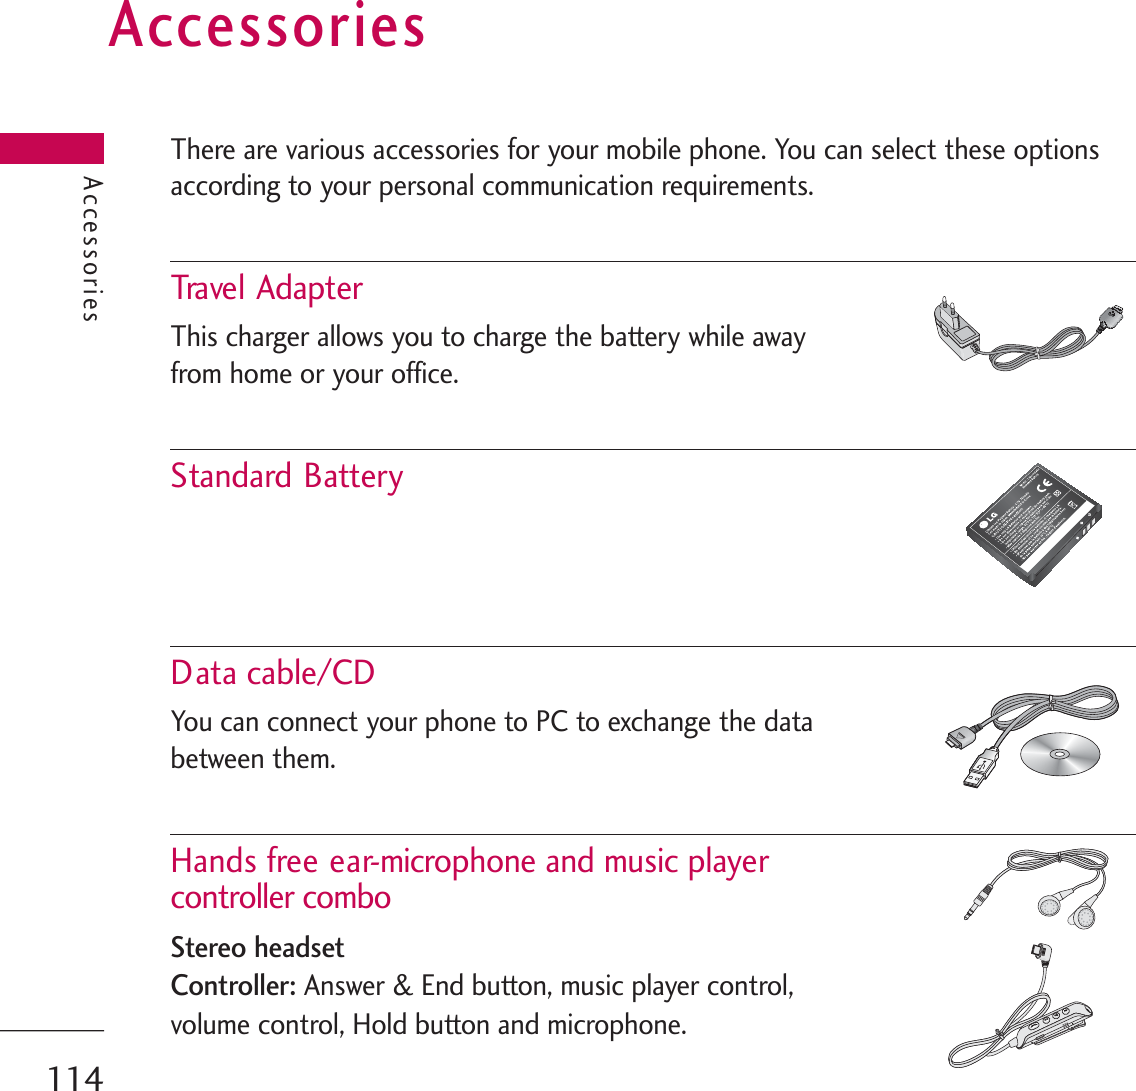 AccessoriesThere are various accessories for your mobile phone. You can select these optionsaccording to your personal communication requirements.Trave l  AdapterThis charger allows you to charge the battery while away from home or your office.Standard BatteryData cable/CDYou can connect your phone to PC to exchange the databetween them.Hands free ear-microphone and music player controller comboStereo headsetController:Answer &amp; End button, music player control, volume control, Hold button and microphone. Accessories114